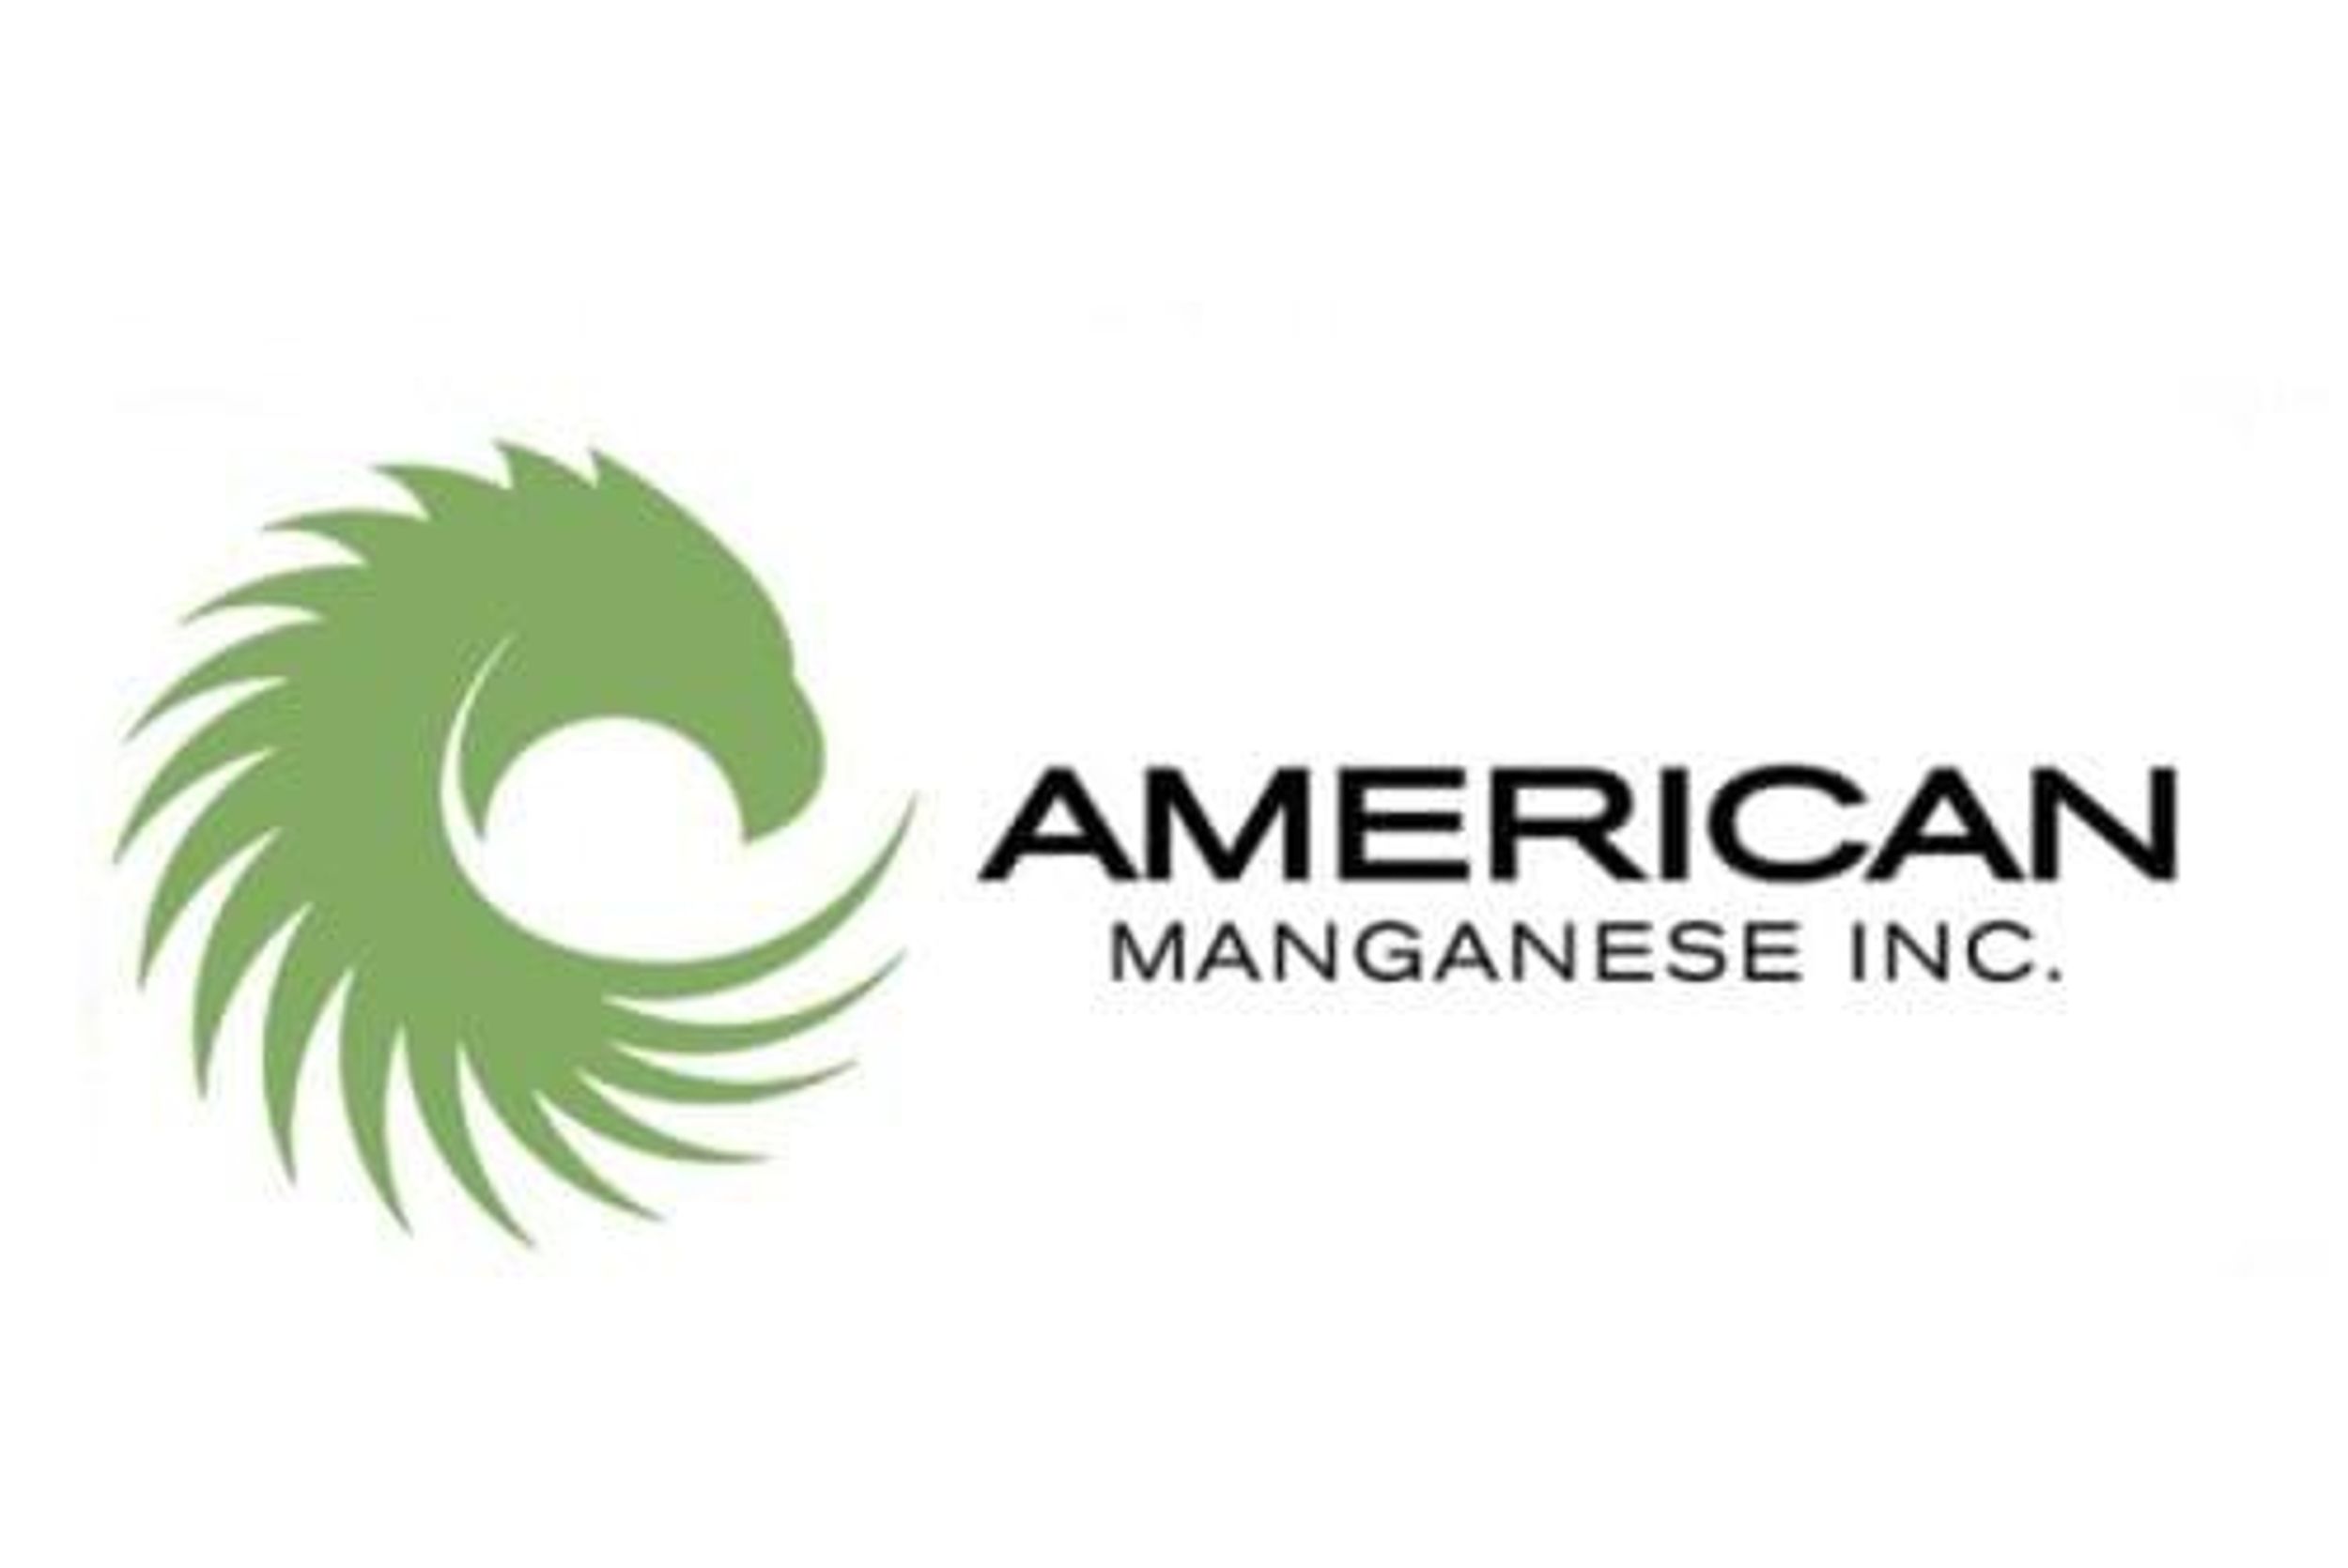 American Manganese and Zenith Chemical Sign Memorandum of Understanding for Strategic Expansion into Asia's Battery Recycling Market